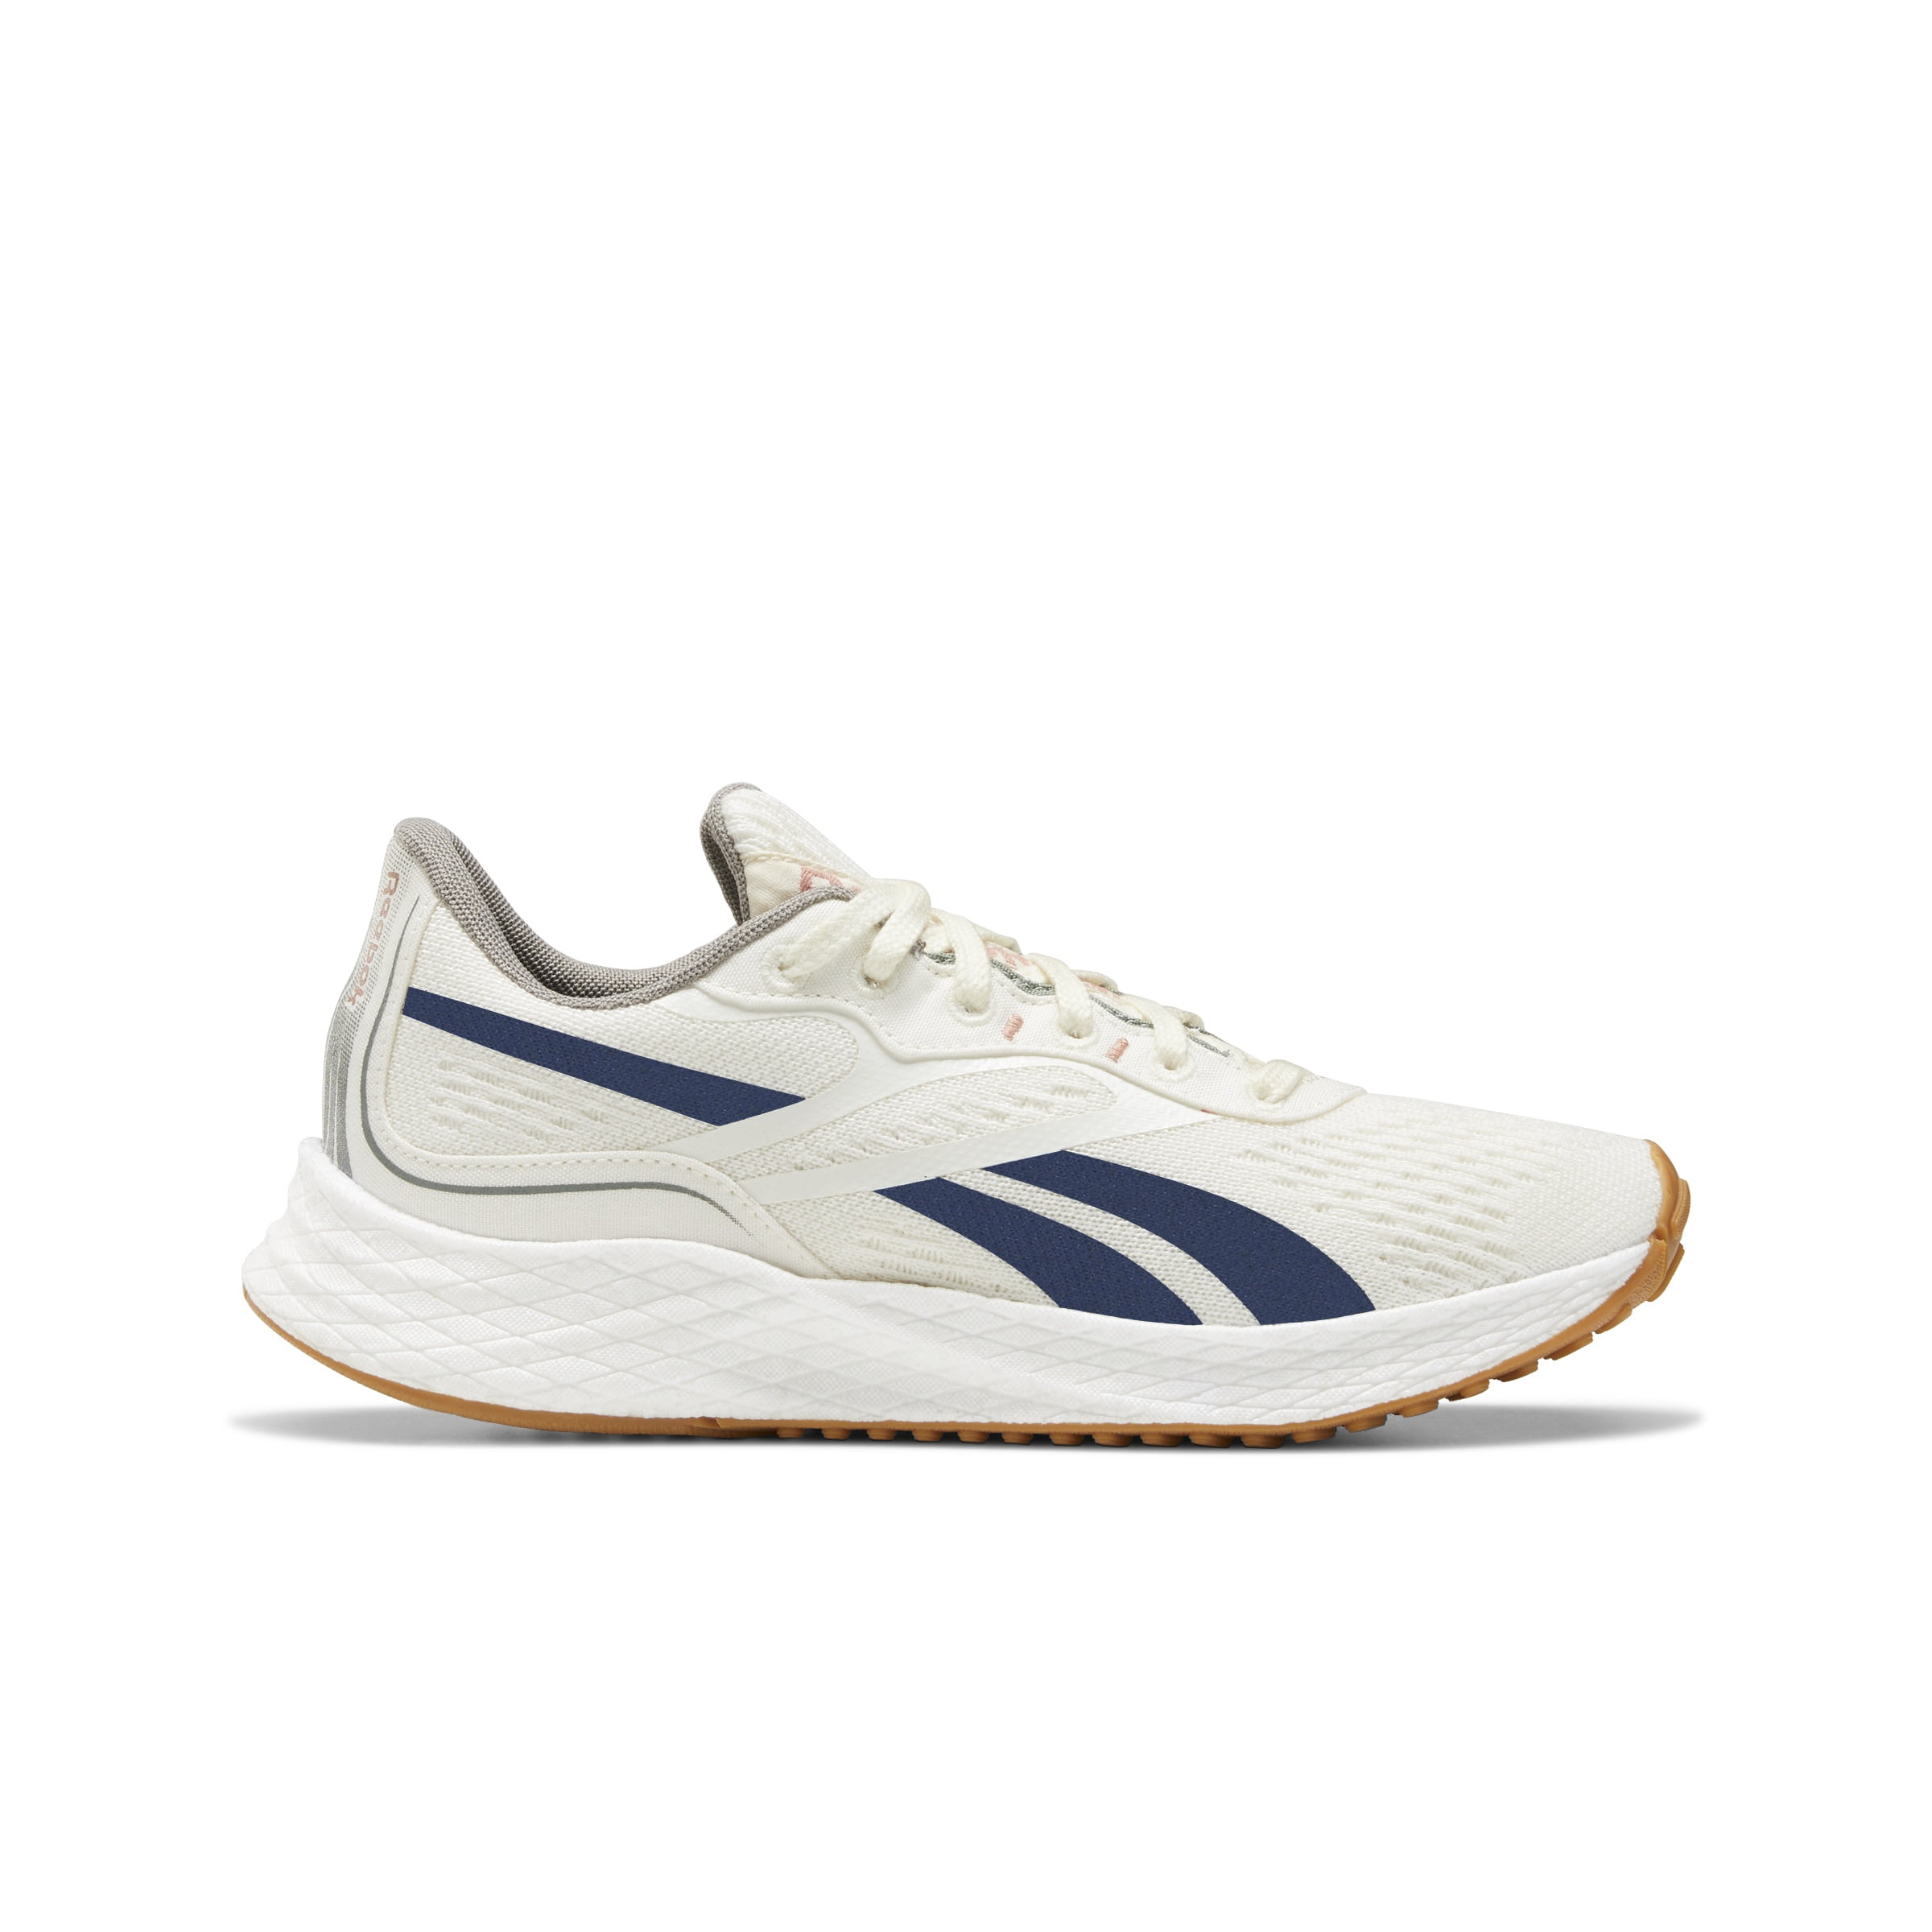 Does Reebok Floatride Come in Womens Size 11?